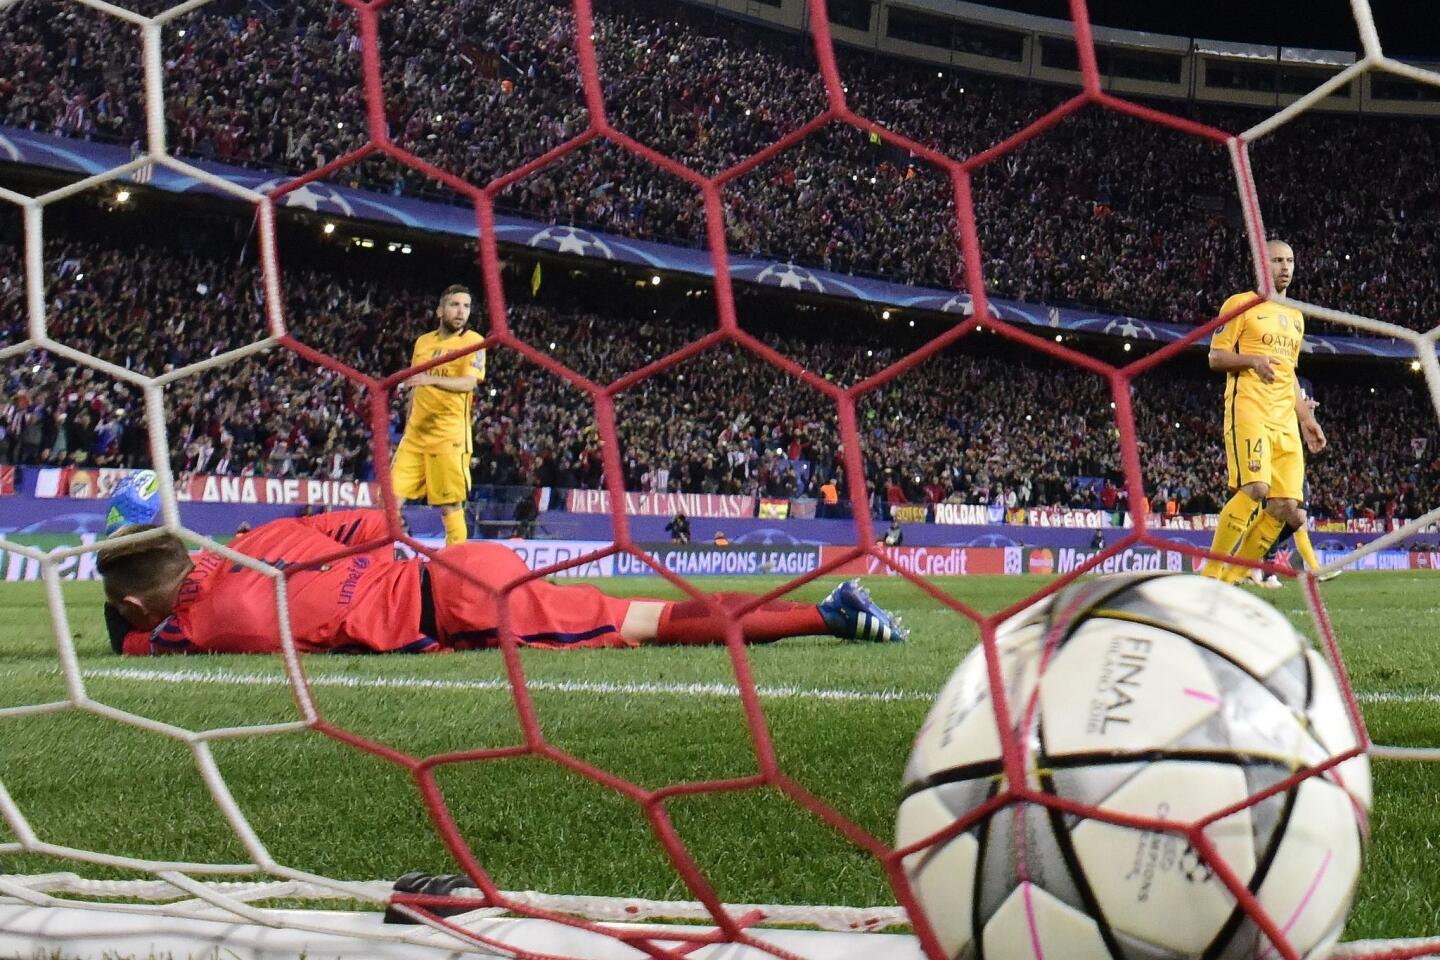 Barcelona's German goalkeeper Marc-Andre Ter Stegen lies on the field after a goal by Atletico Madrid's French forward Antoine Griezmann during the Champions League quarter-final second leg football match Club Atletico de Madrid vs FC Barcelona at the Vicente Calderon stadium in Madrid on April 13, 2016. / AFP PHOTO / JAVIER SORIANOJAVIER SORIANO/AFP/Getty Images ** OUTS - ELSENT, FPG, CM - OUTS * NM, PH, VA if sourced by CT, LA or MoD **